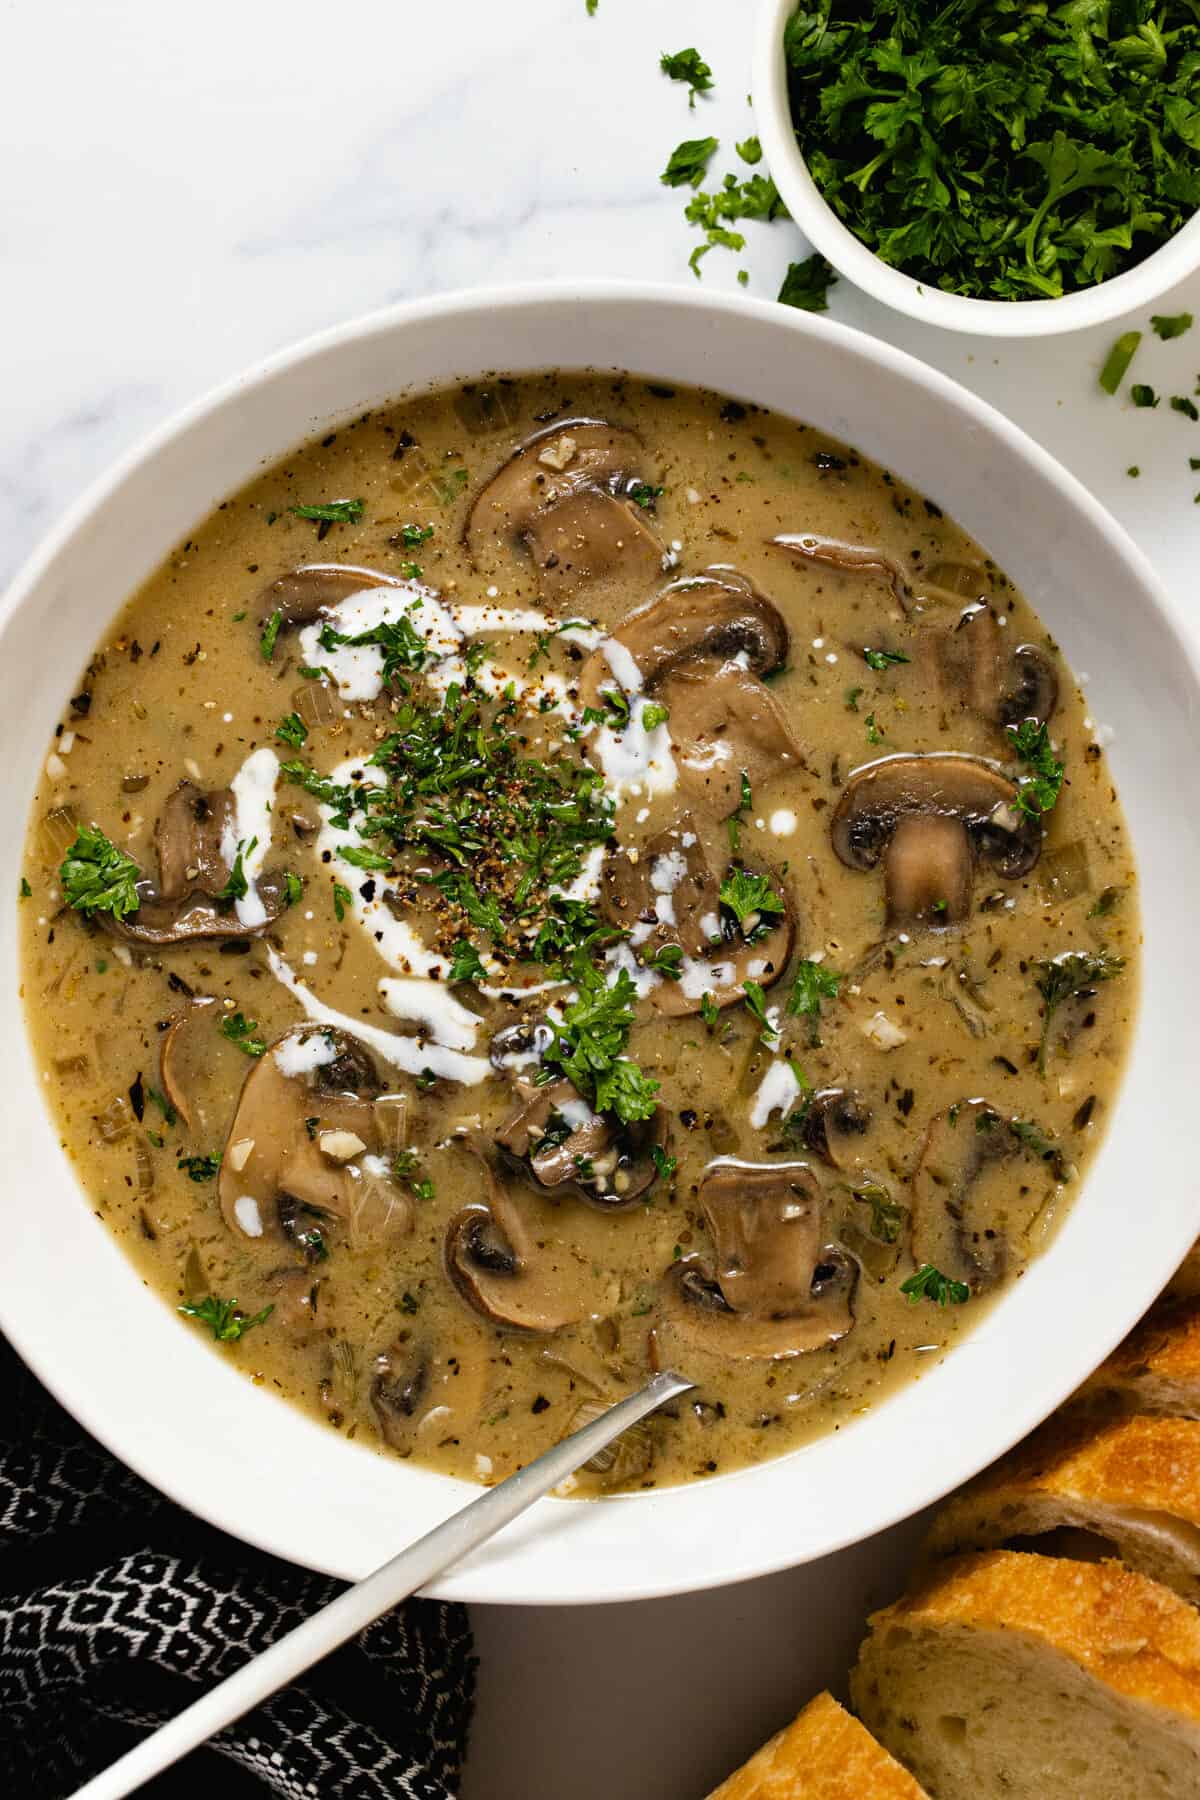 White bowl filled with creamy vegan mushroom soup garnished with parsley